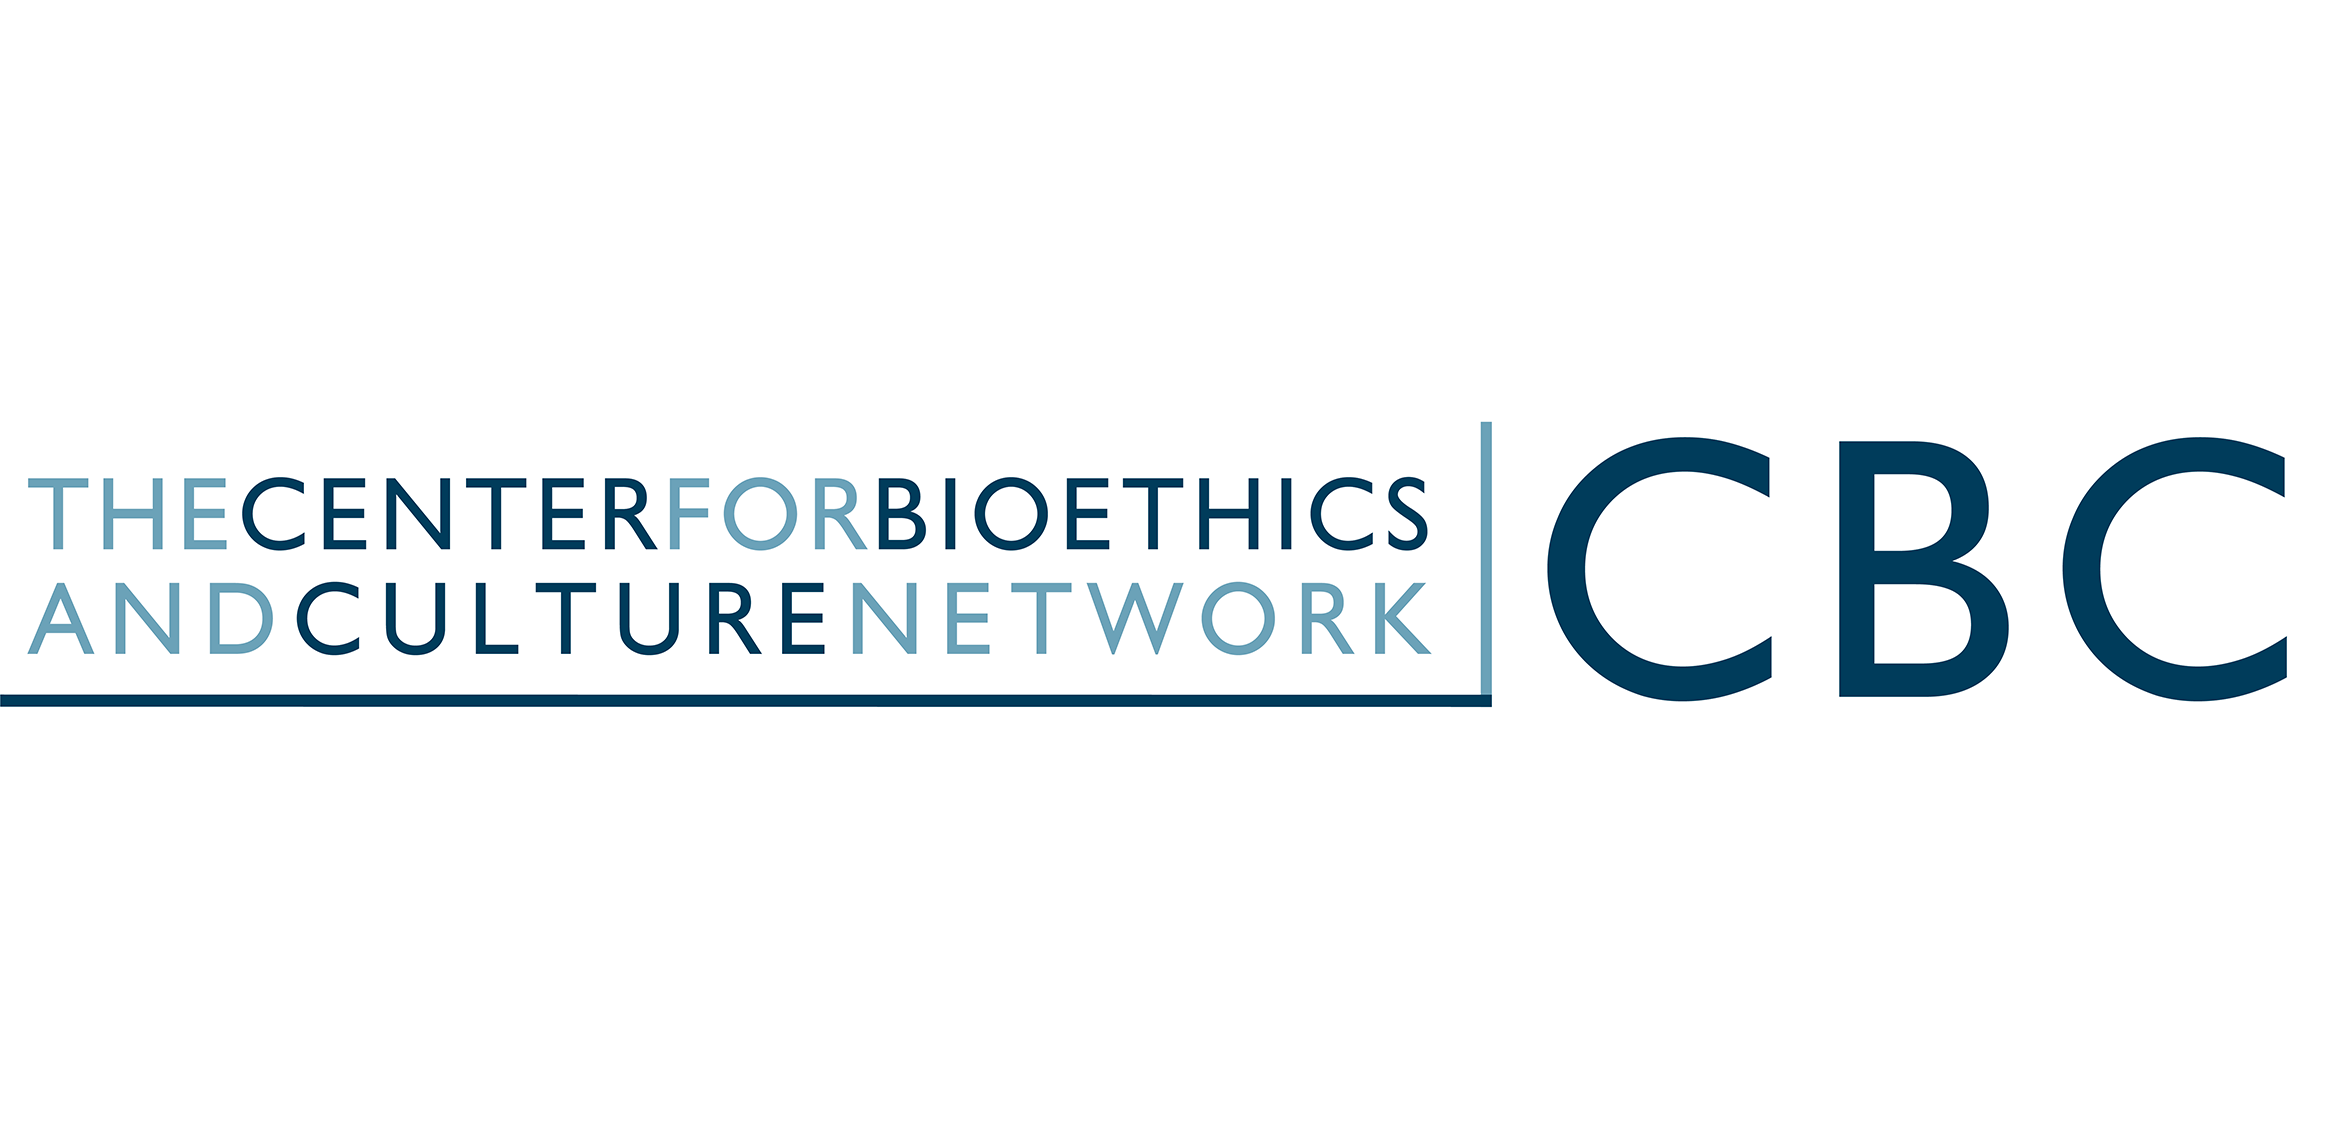 The Center for Bioethics & Culture Network